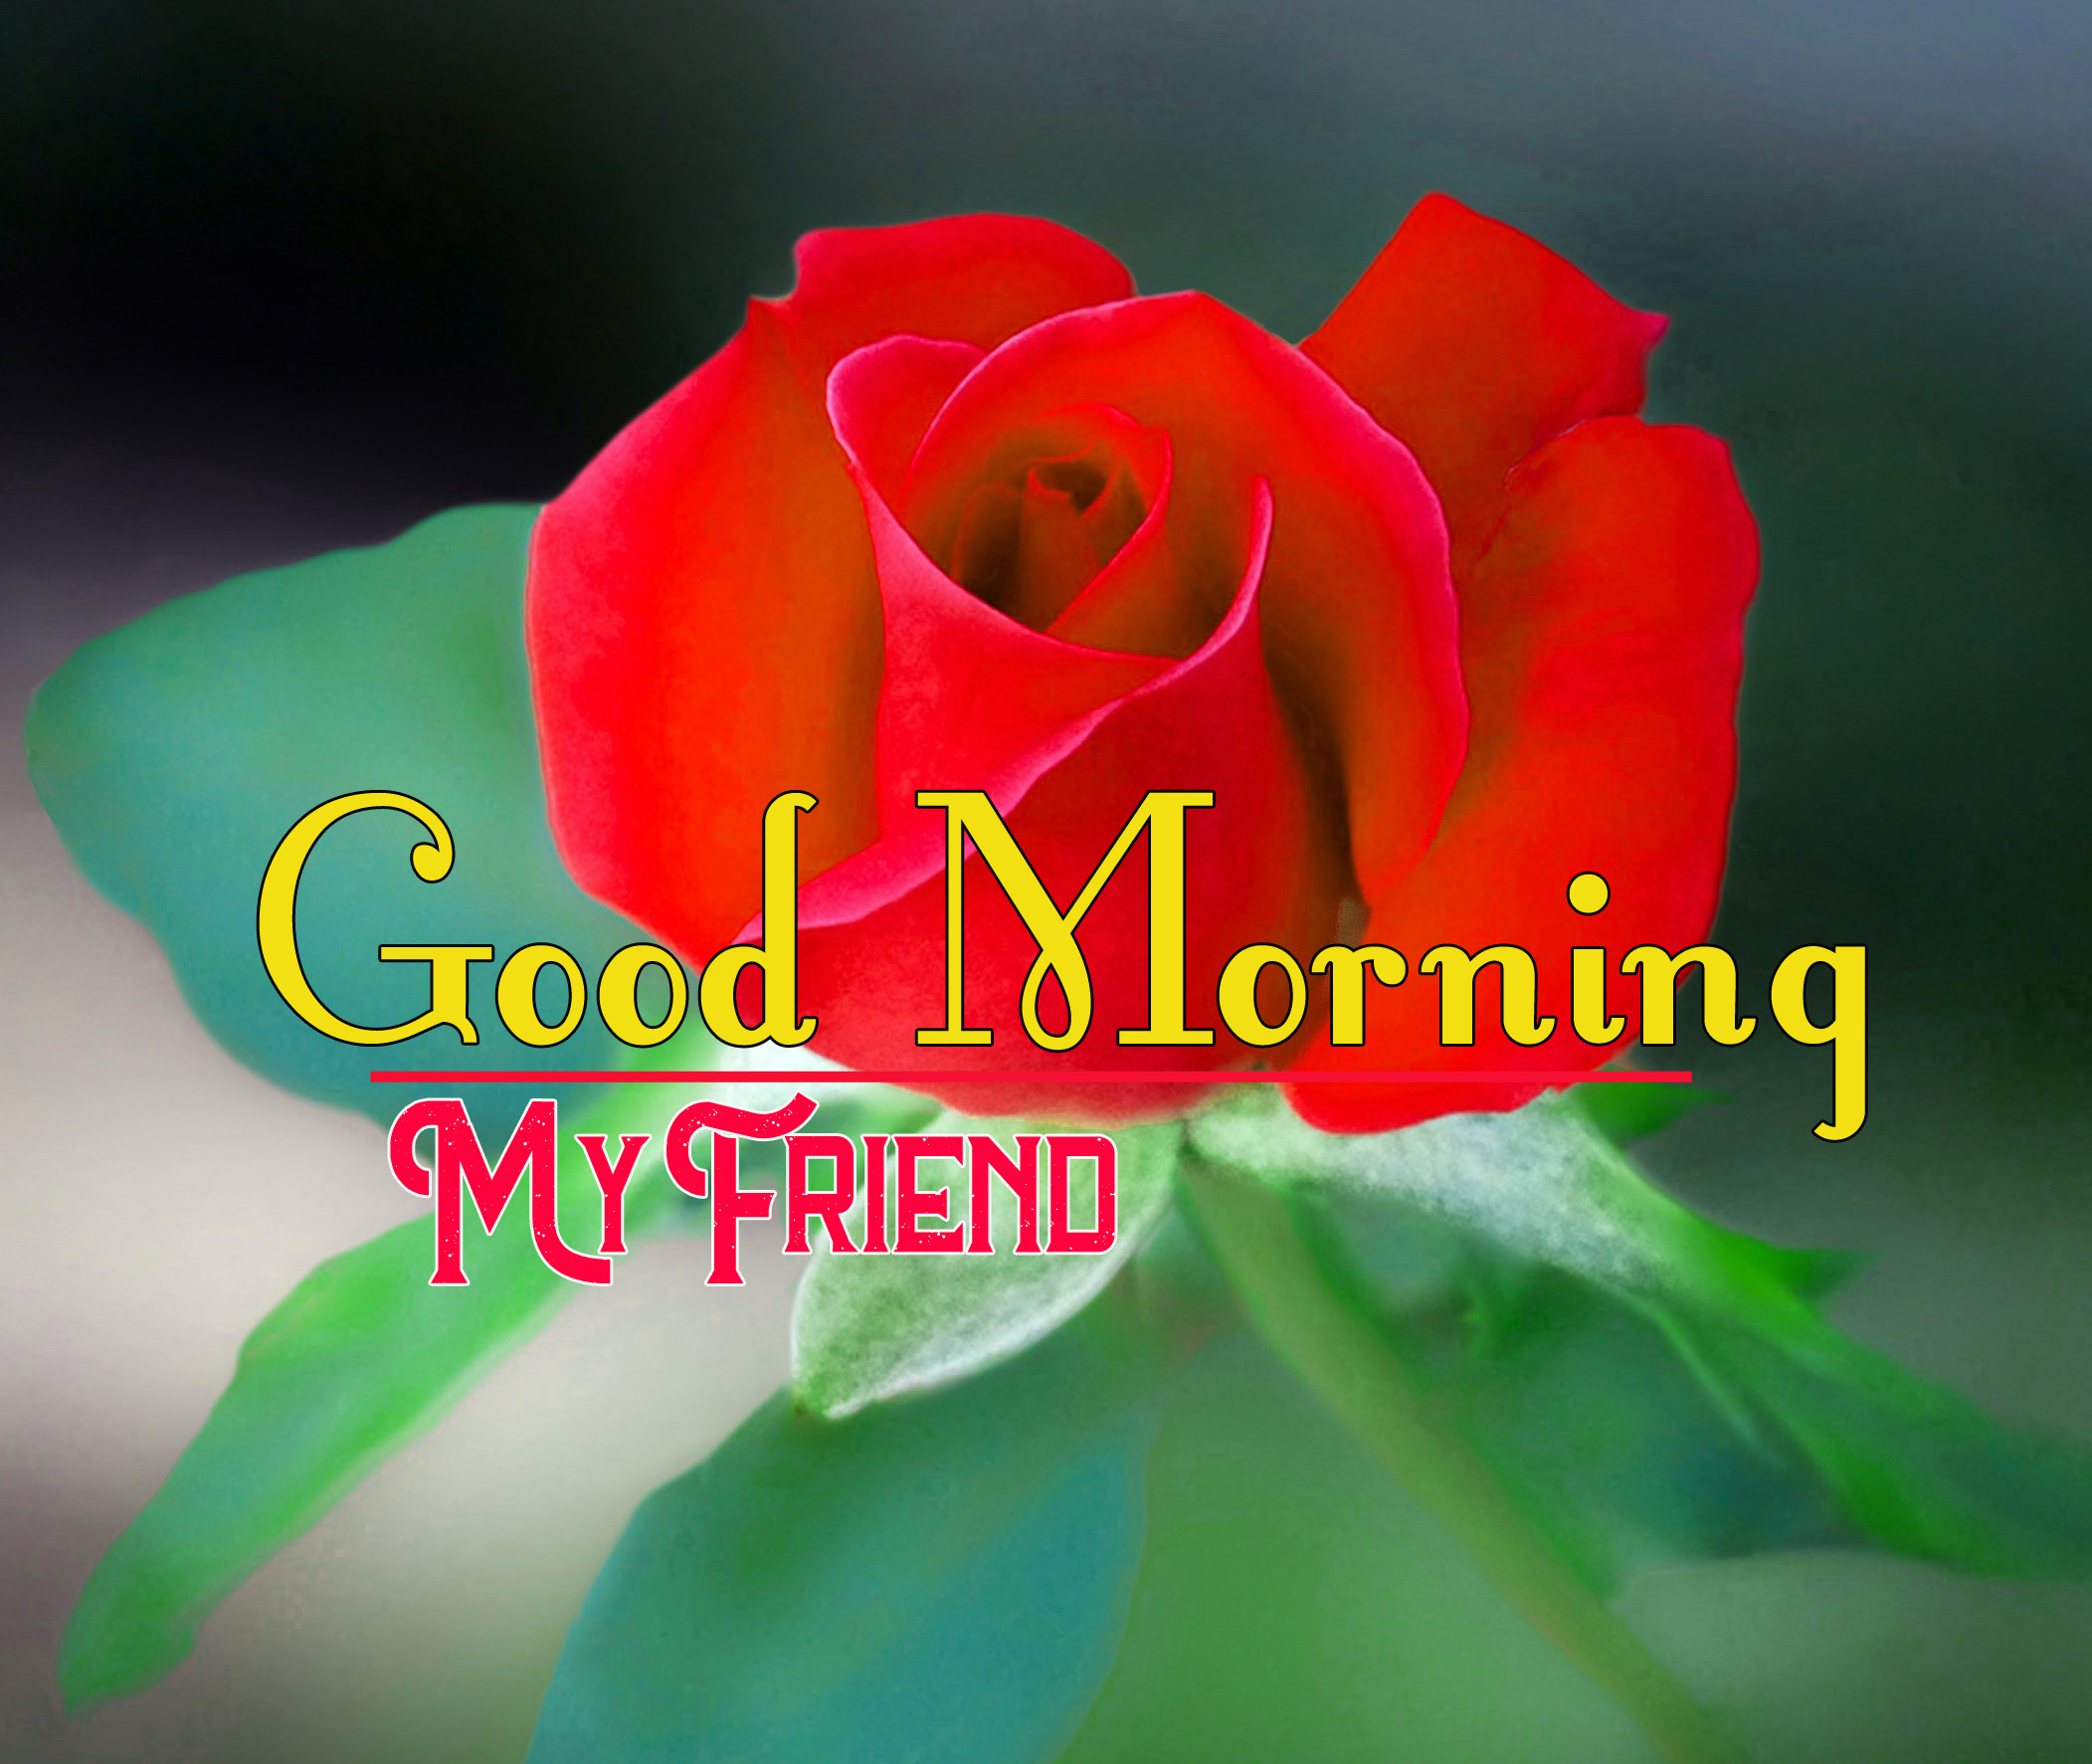 Special Good Morning Wishes Images With Red Rose 